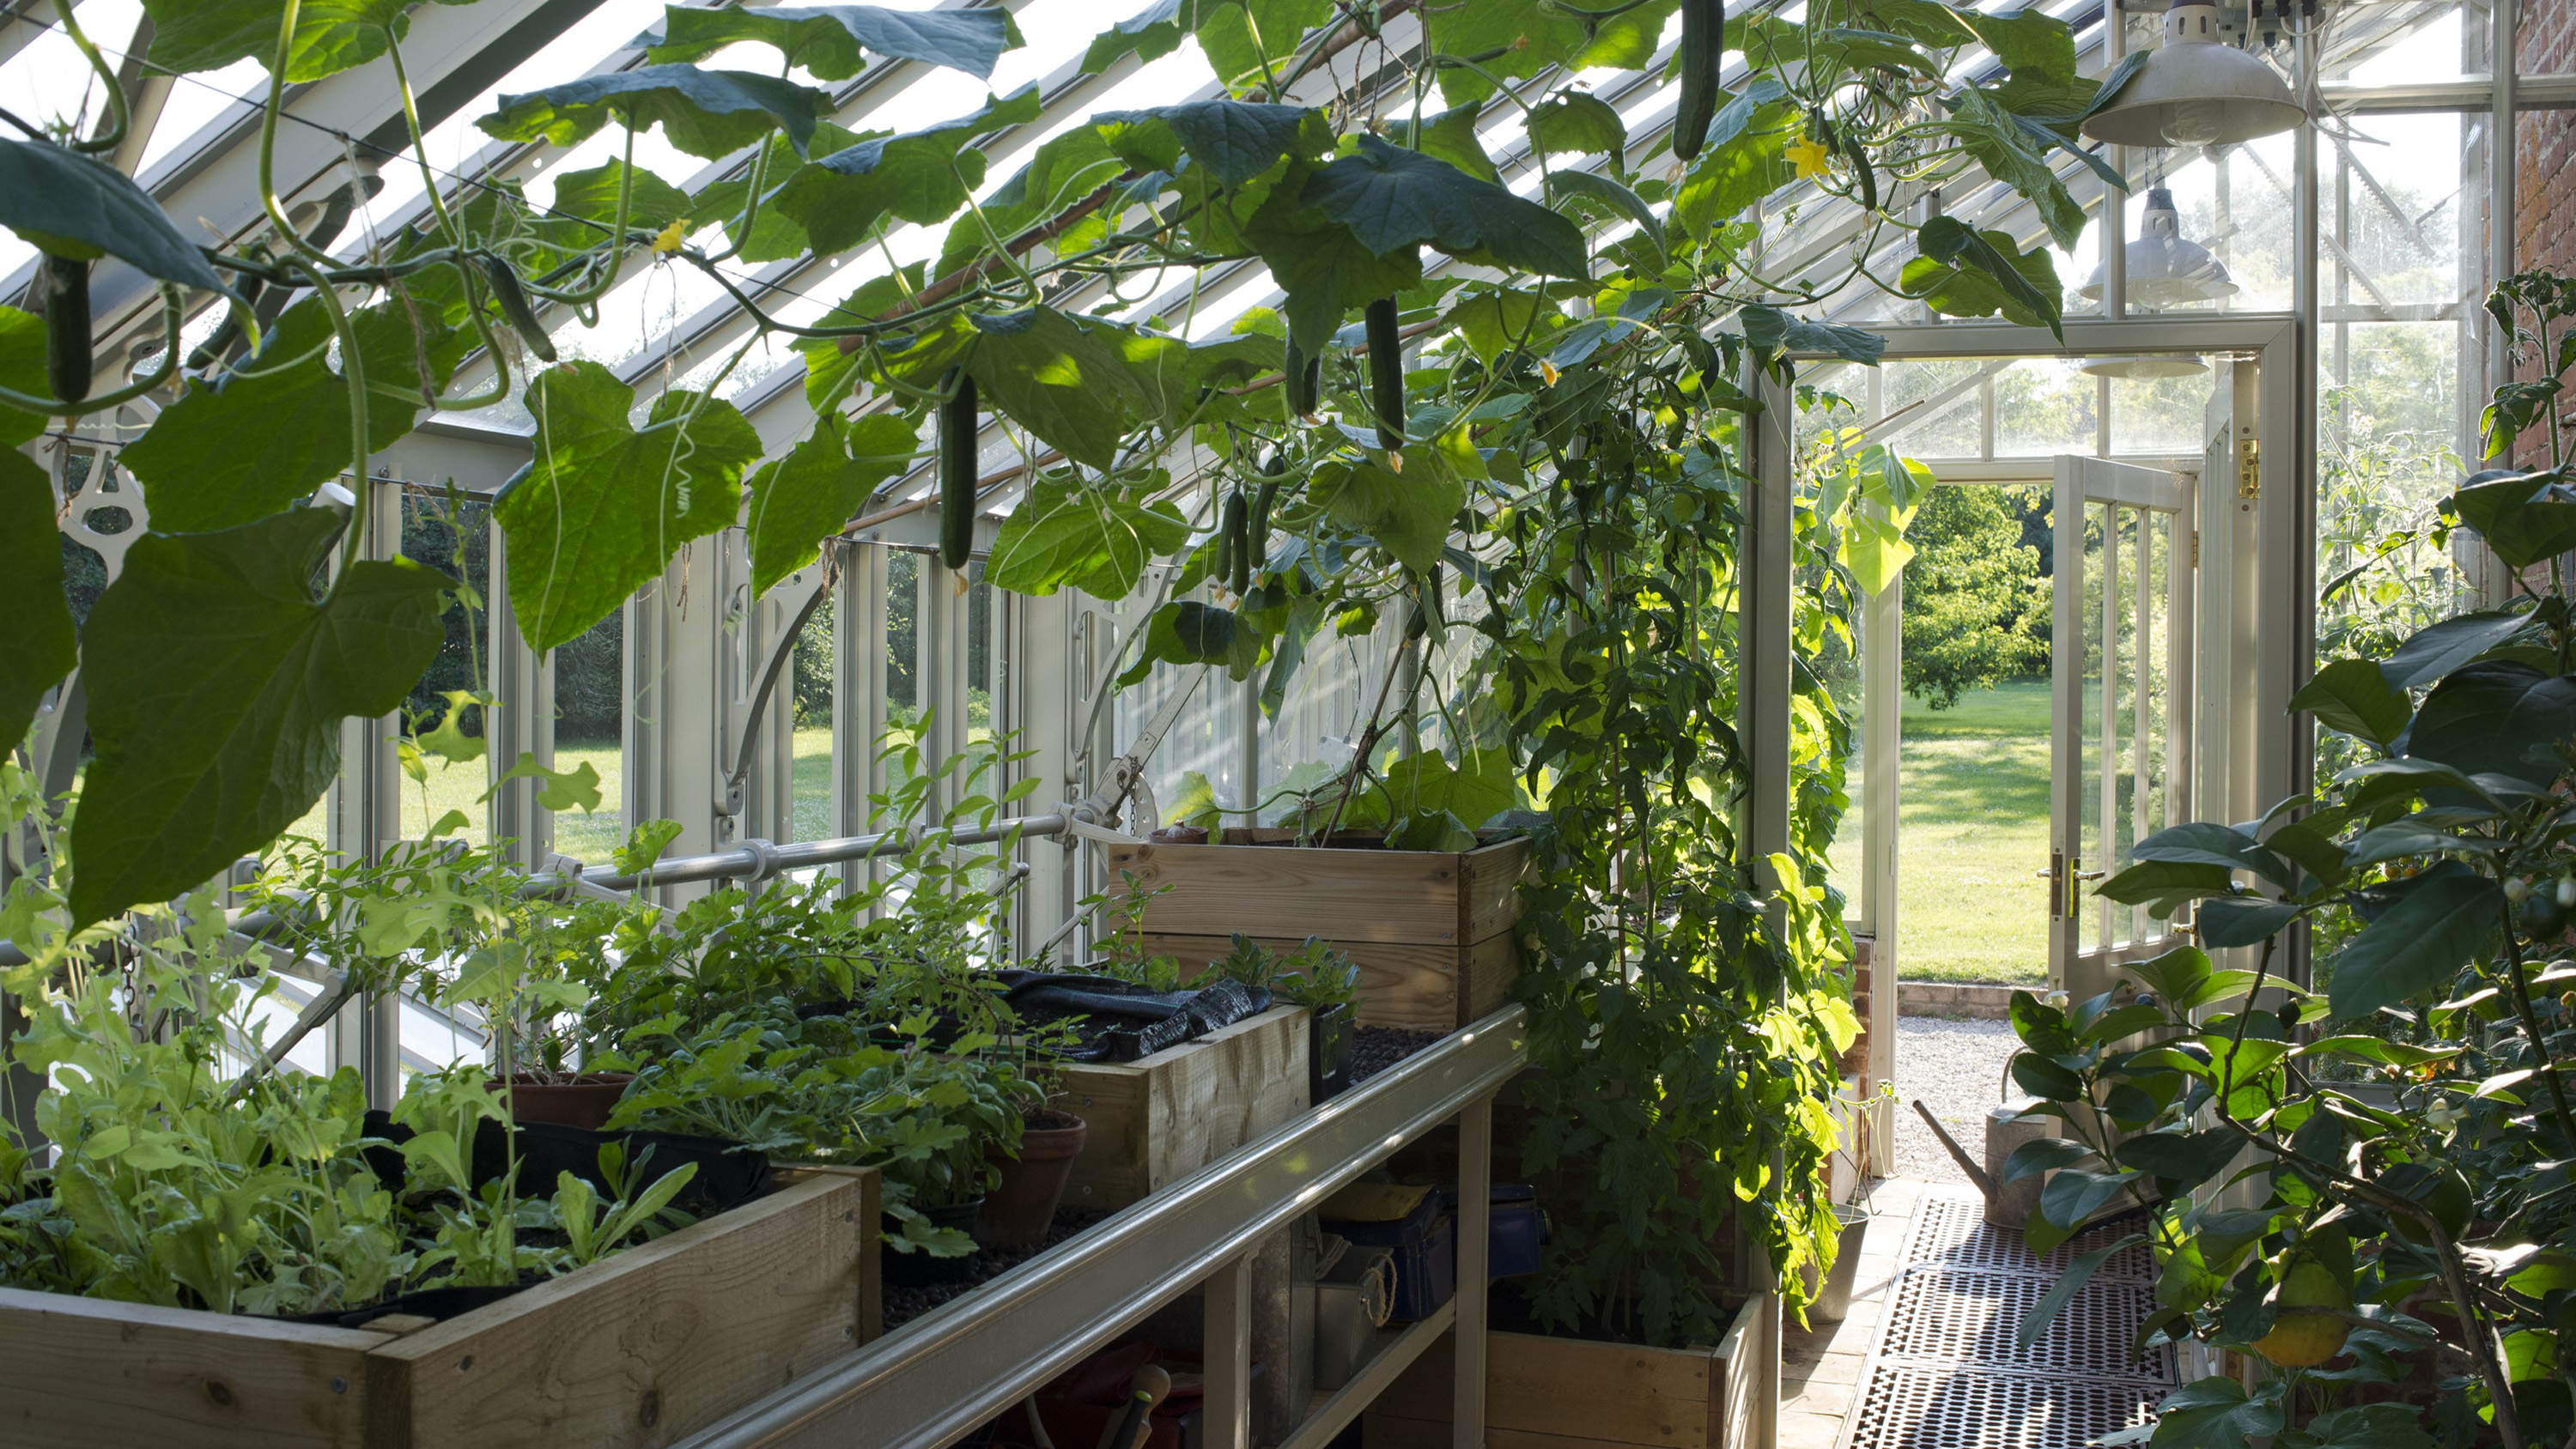 6 Trends Shaping the Home Vegetable Garden Market - Greenhouse Grower